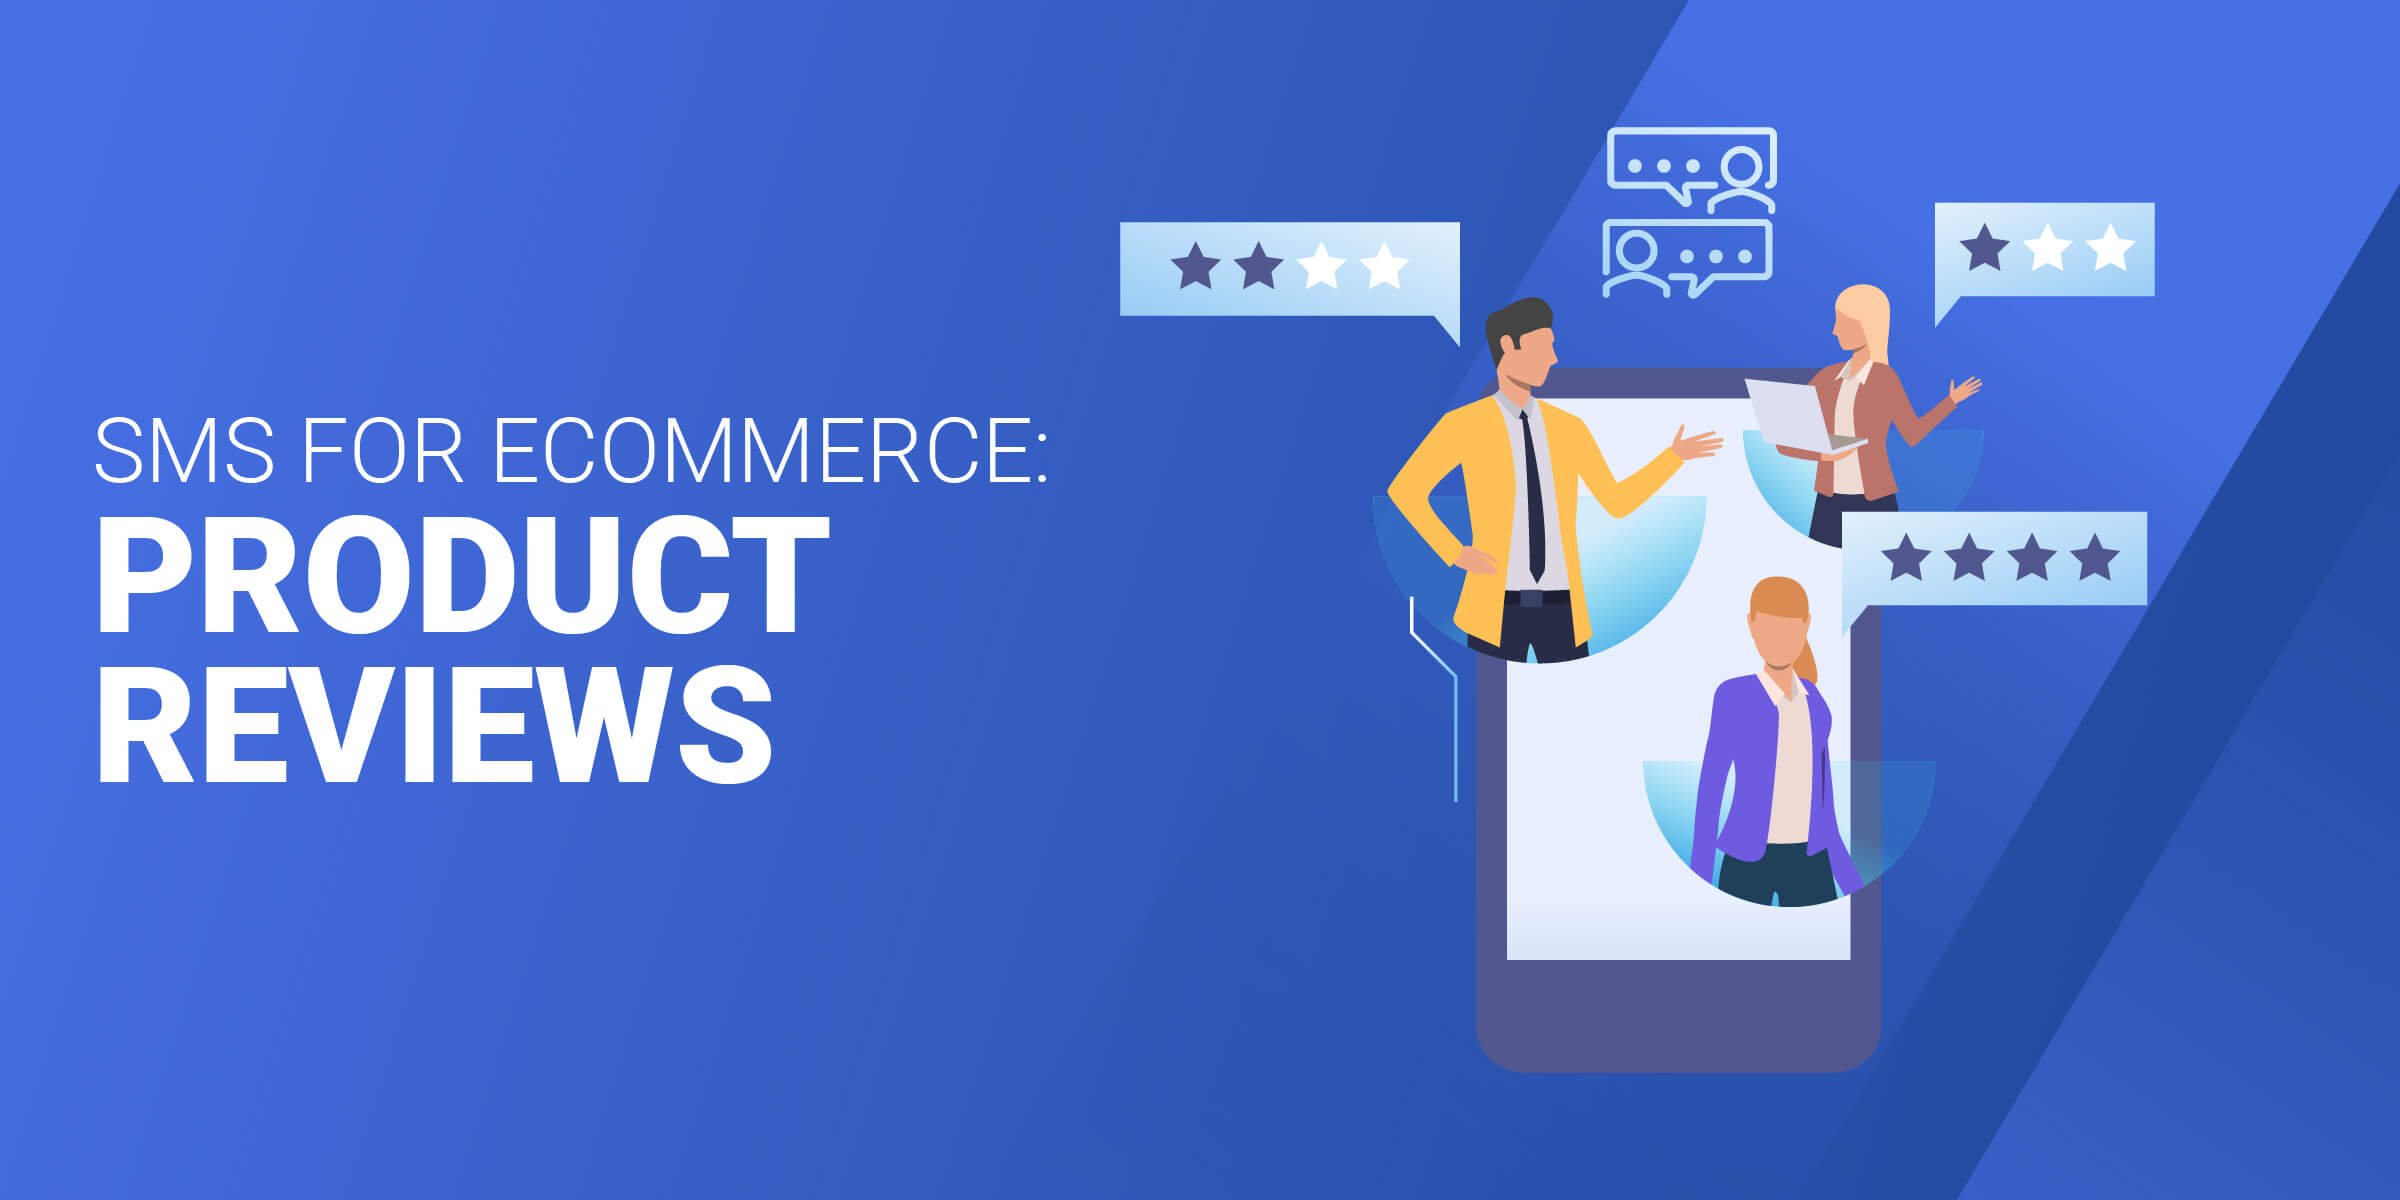 SMS for eCommerce Product Reviews